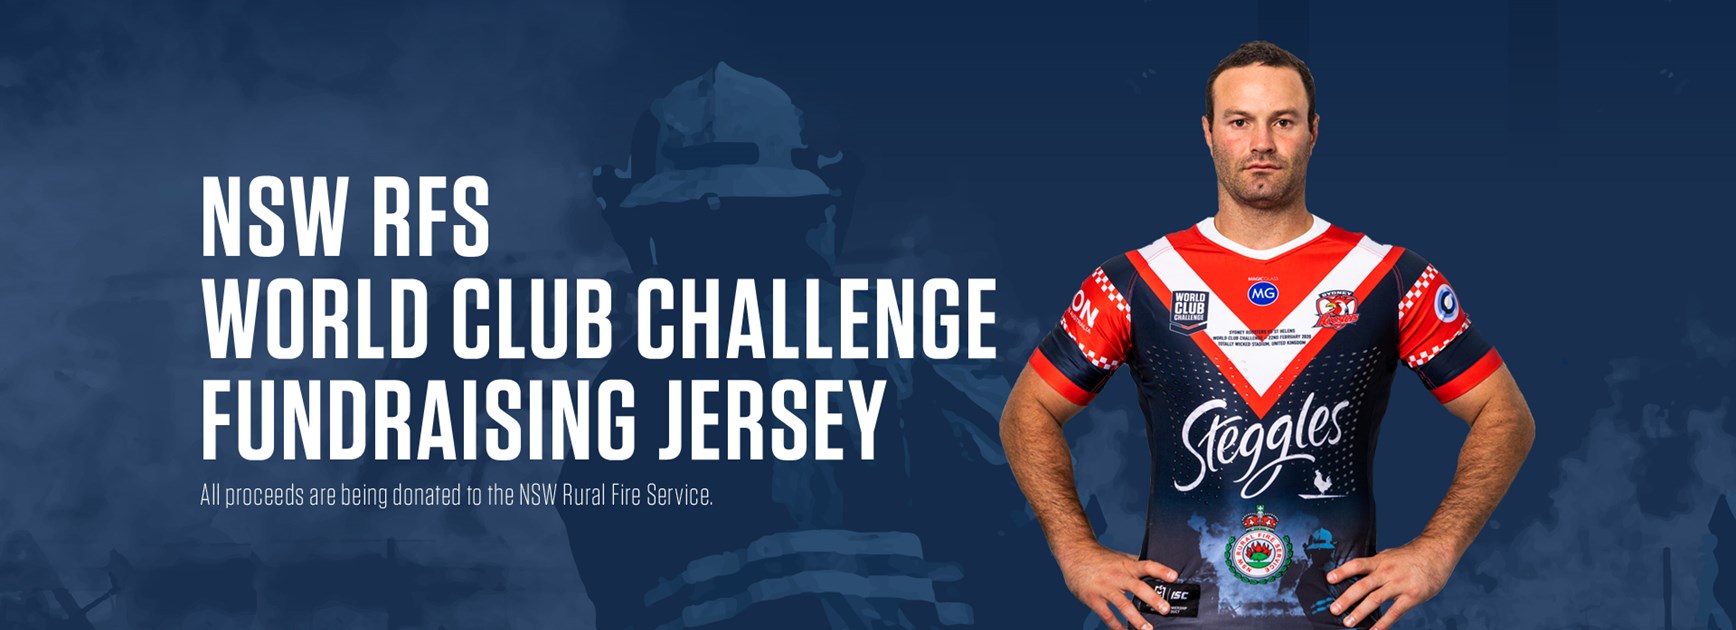 Roosters to wear special World Club Challenge jersey to raise funds for NSW RFS